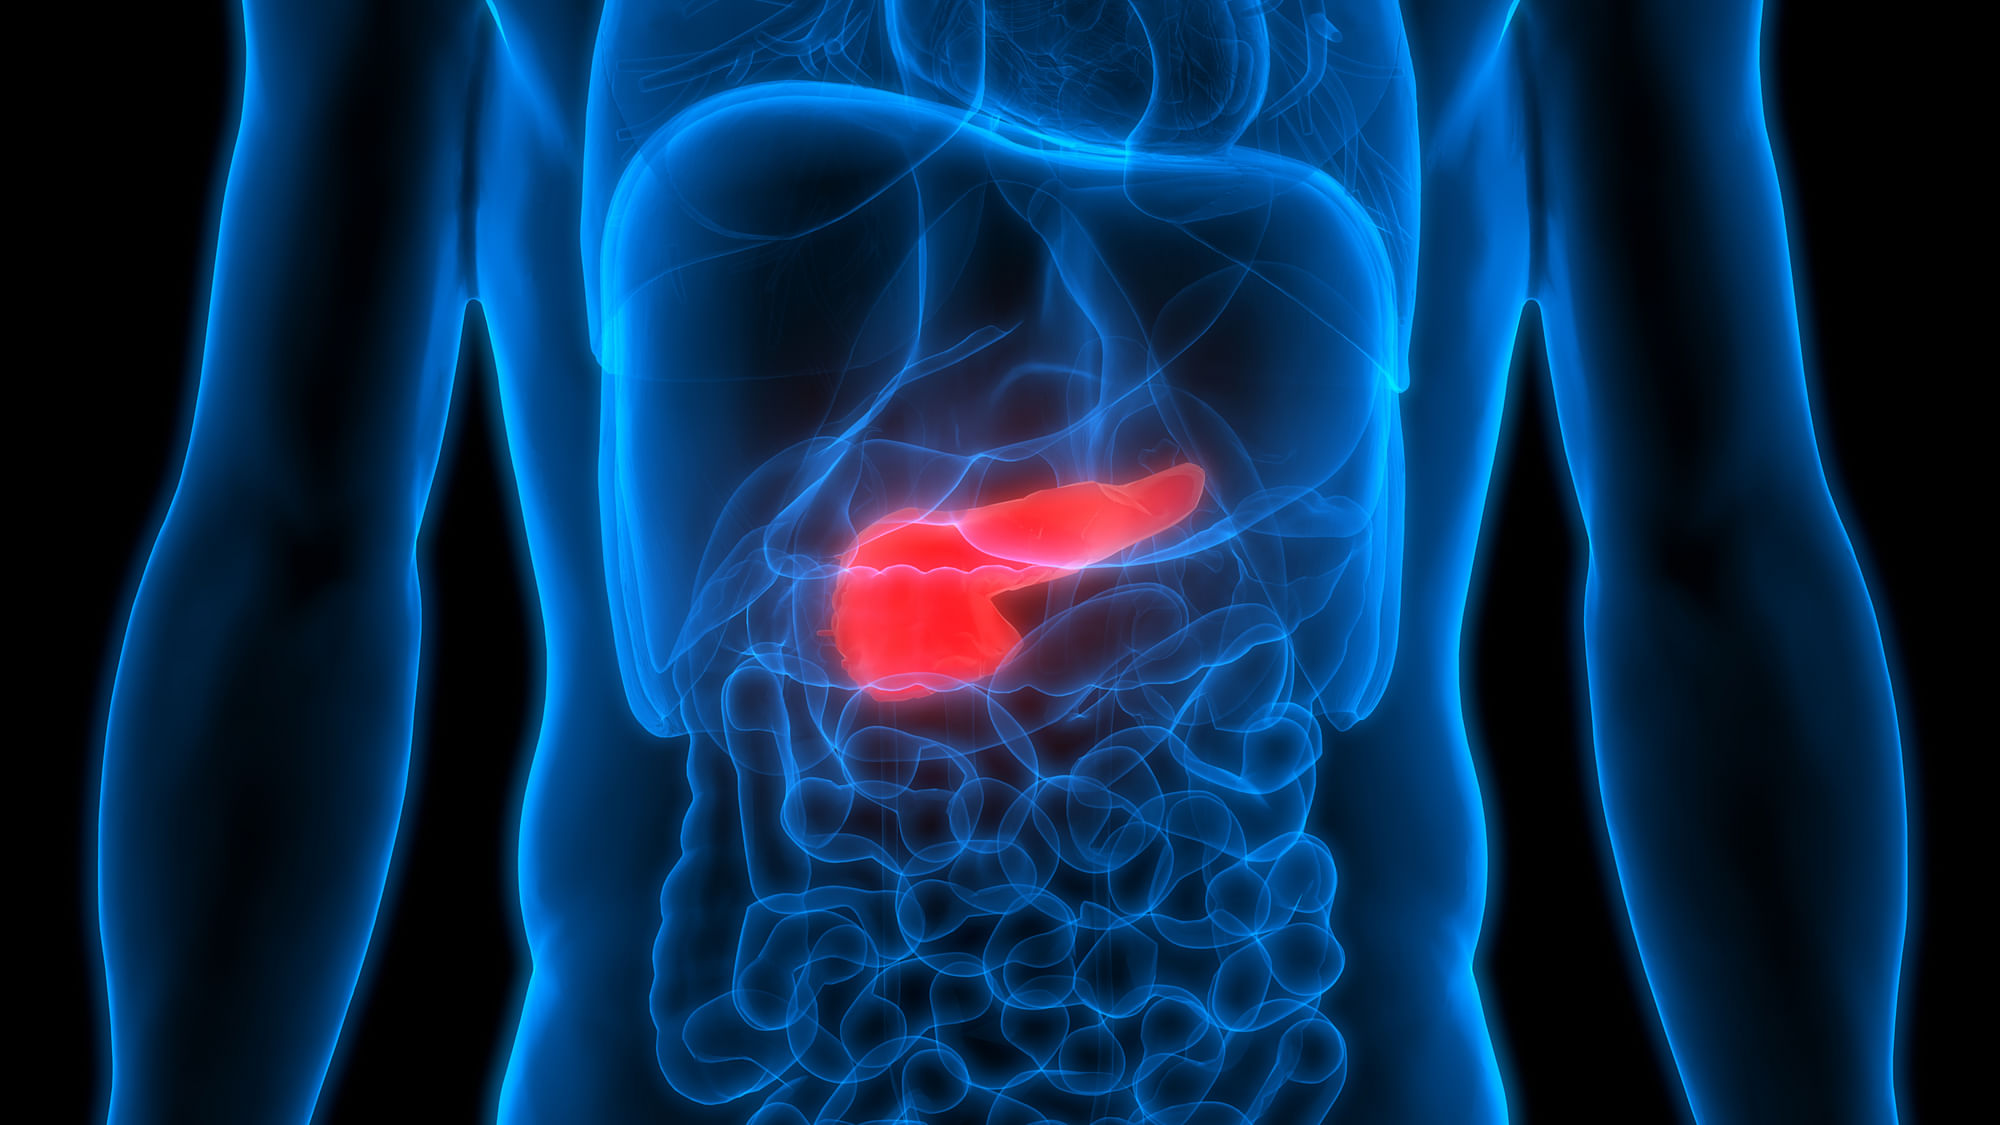 According to a study, global death rates for pancreatic cancer increased by 10 per cent between 1990 and 2017